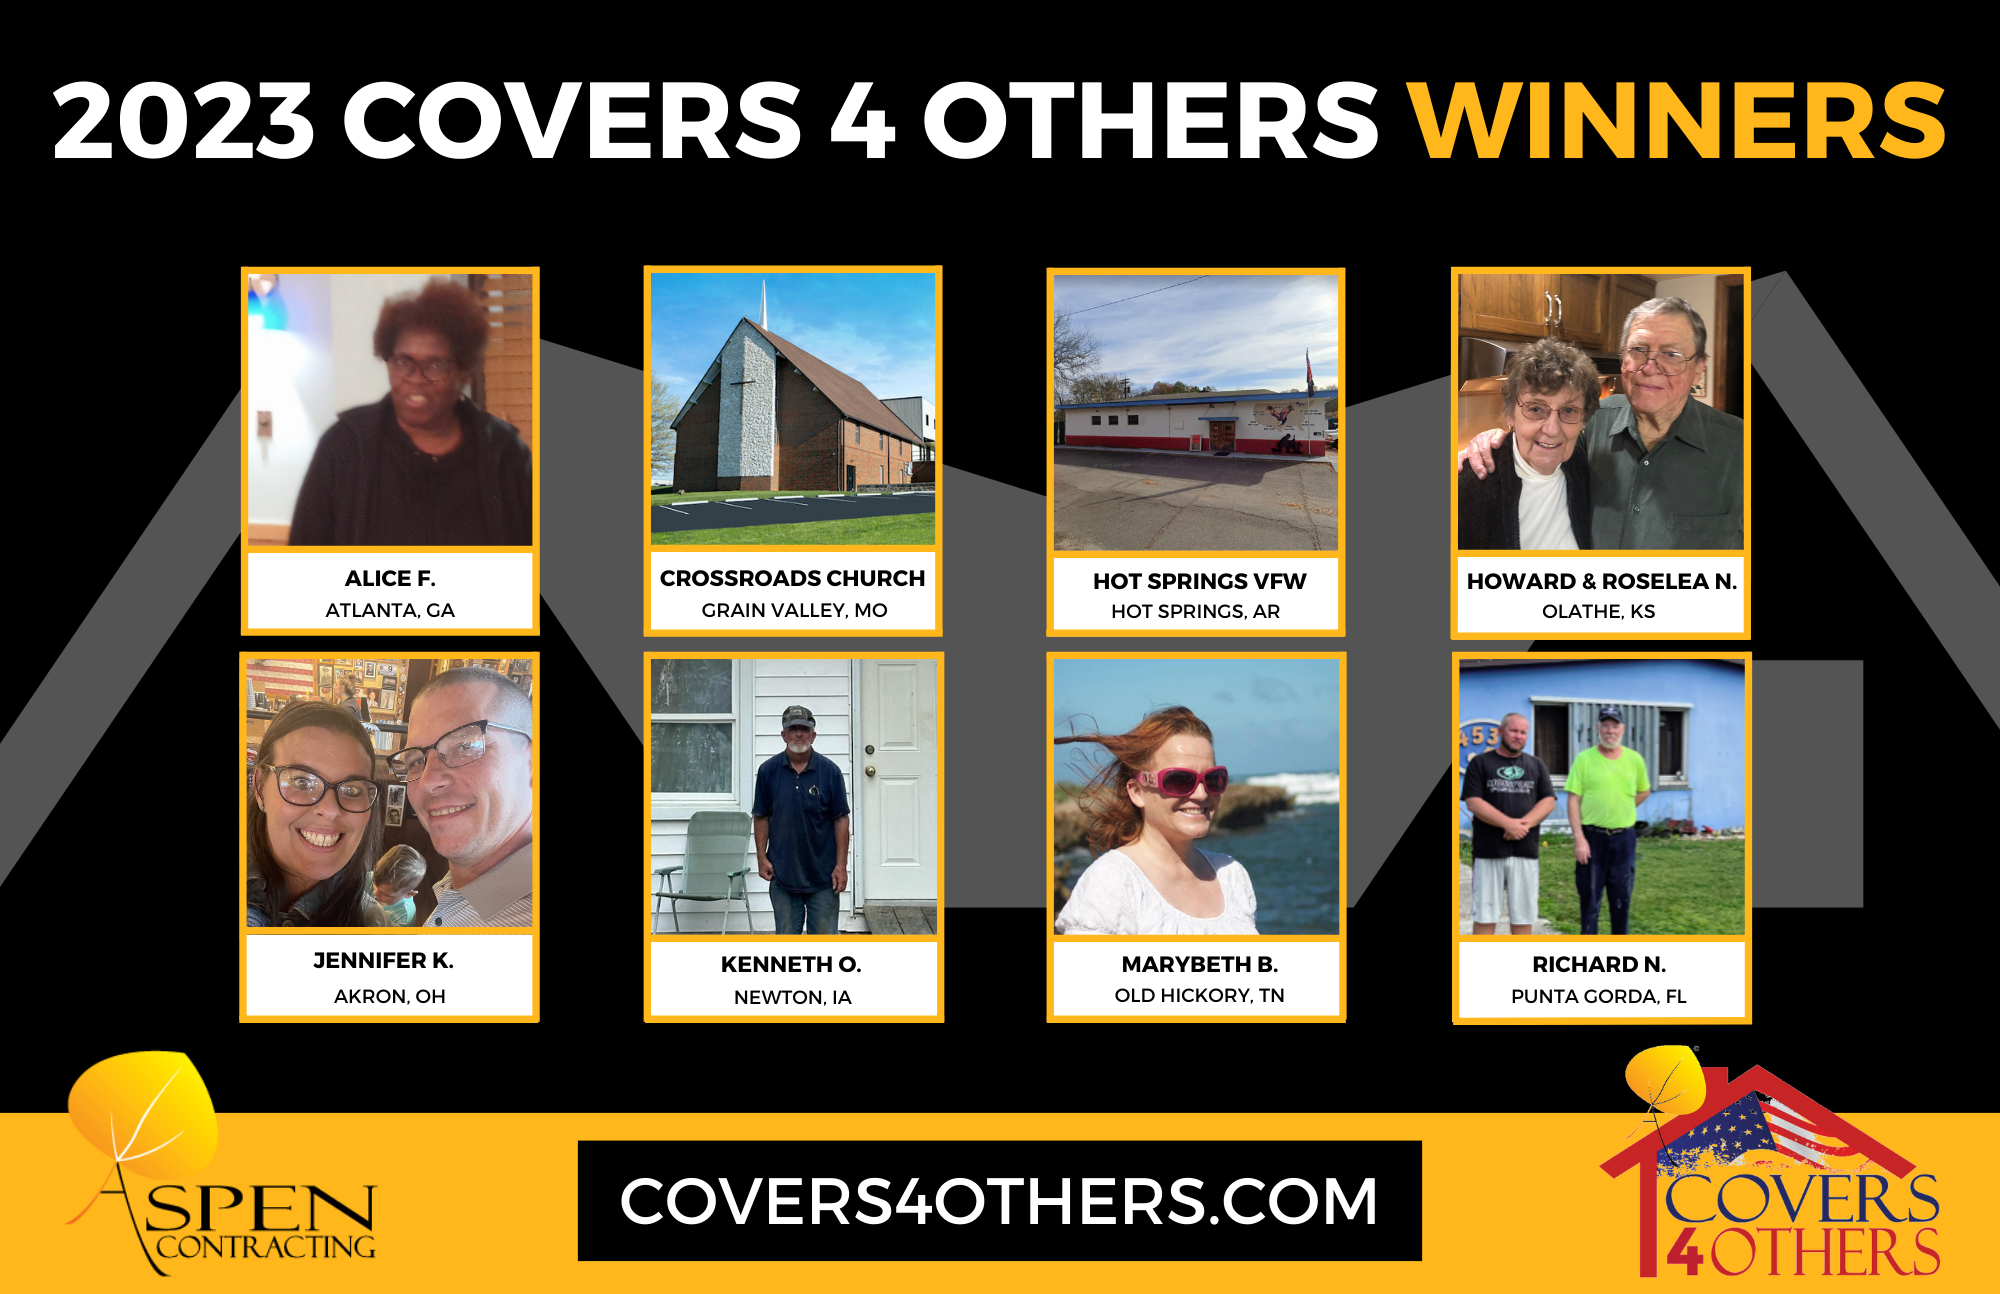 Covers 4 Others 2023 Winners